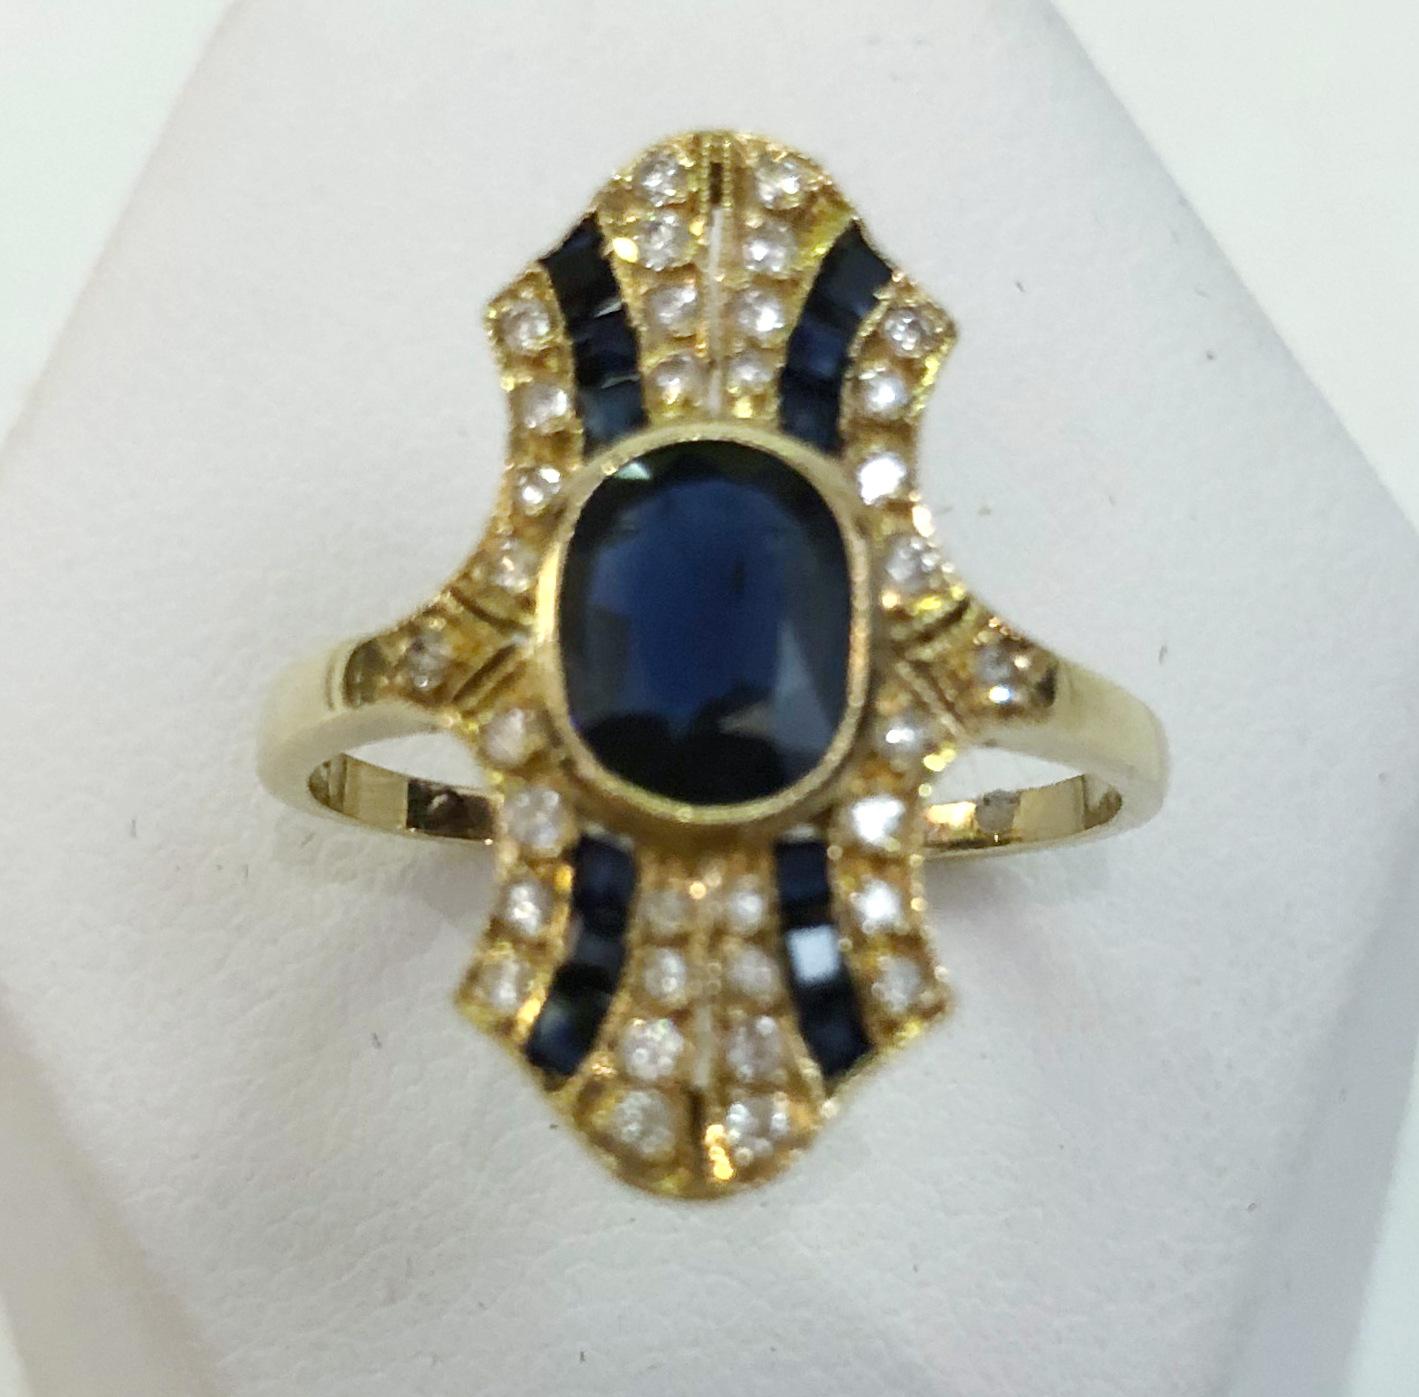 Yellow gold ring with Carre sapphires and Lozenge diamonds / Italy 1960s
Ring size US 7.5